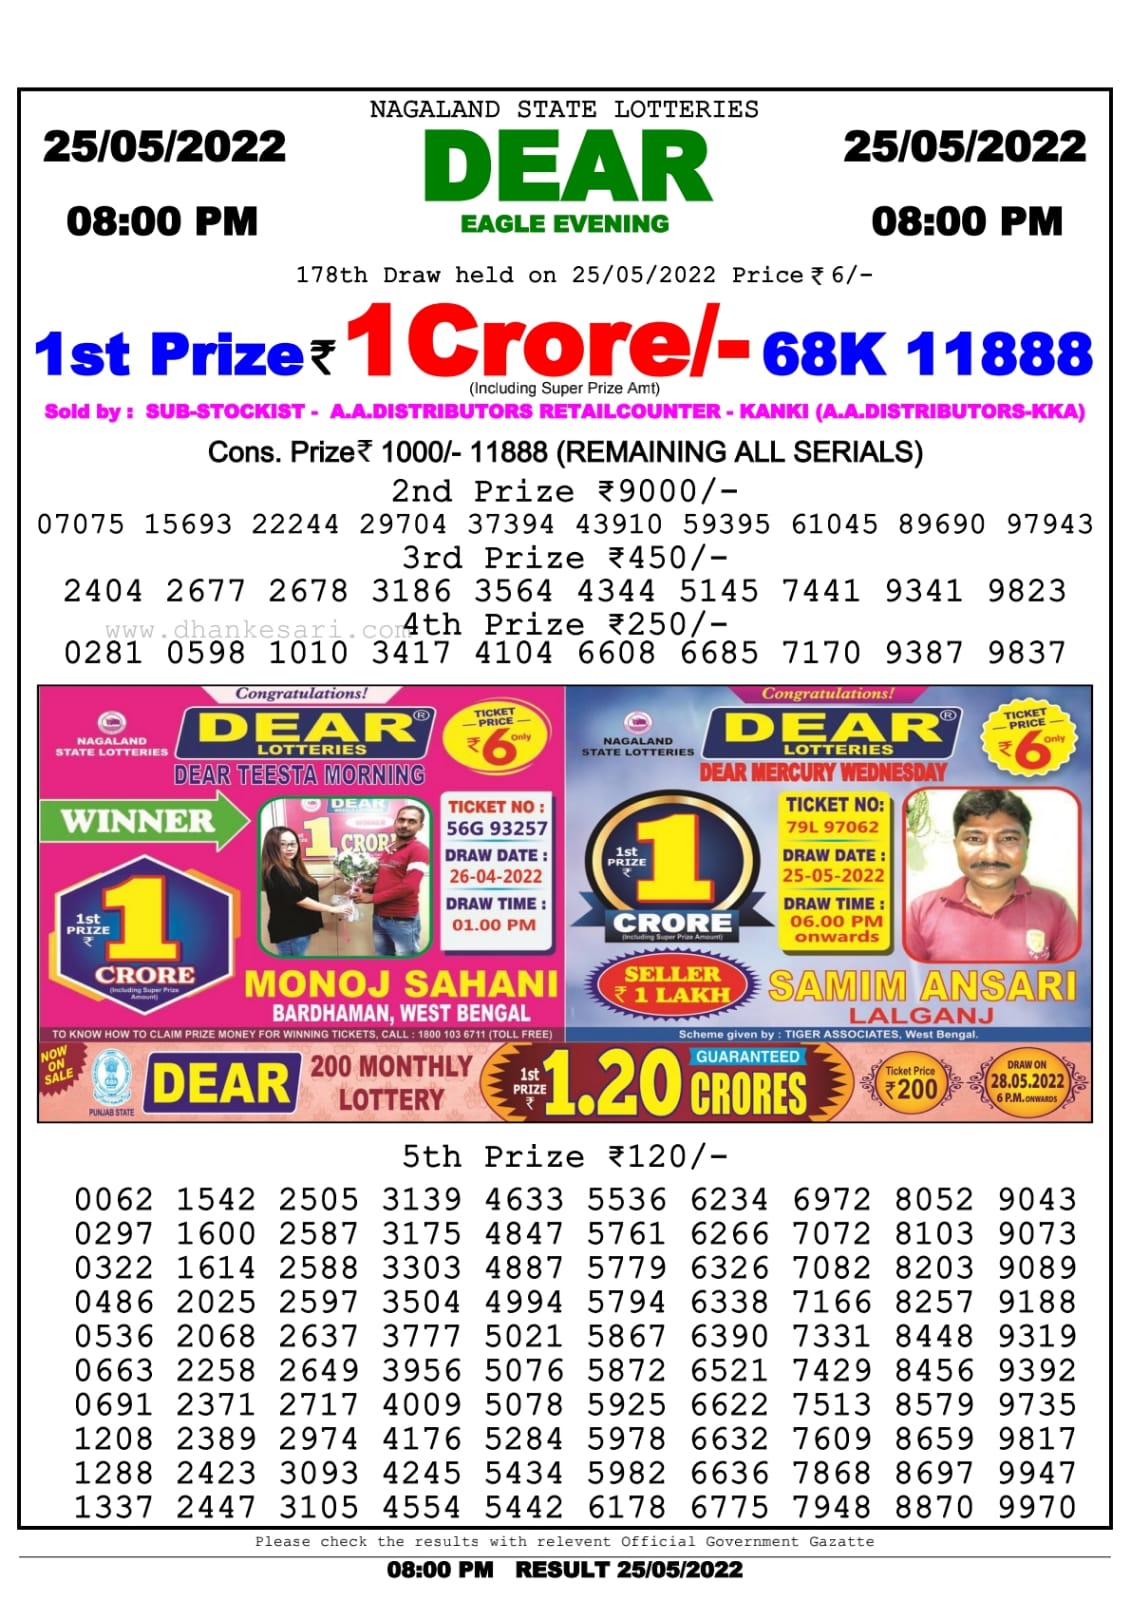 Dear Lottery Nagaland state Lottery Results 06.00 pm 25.05.2022